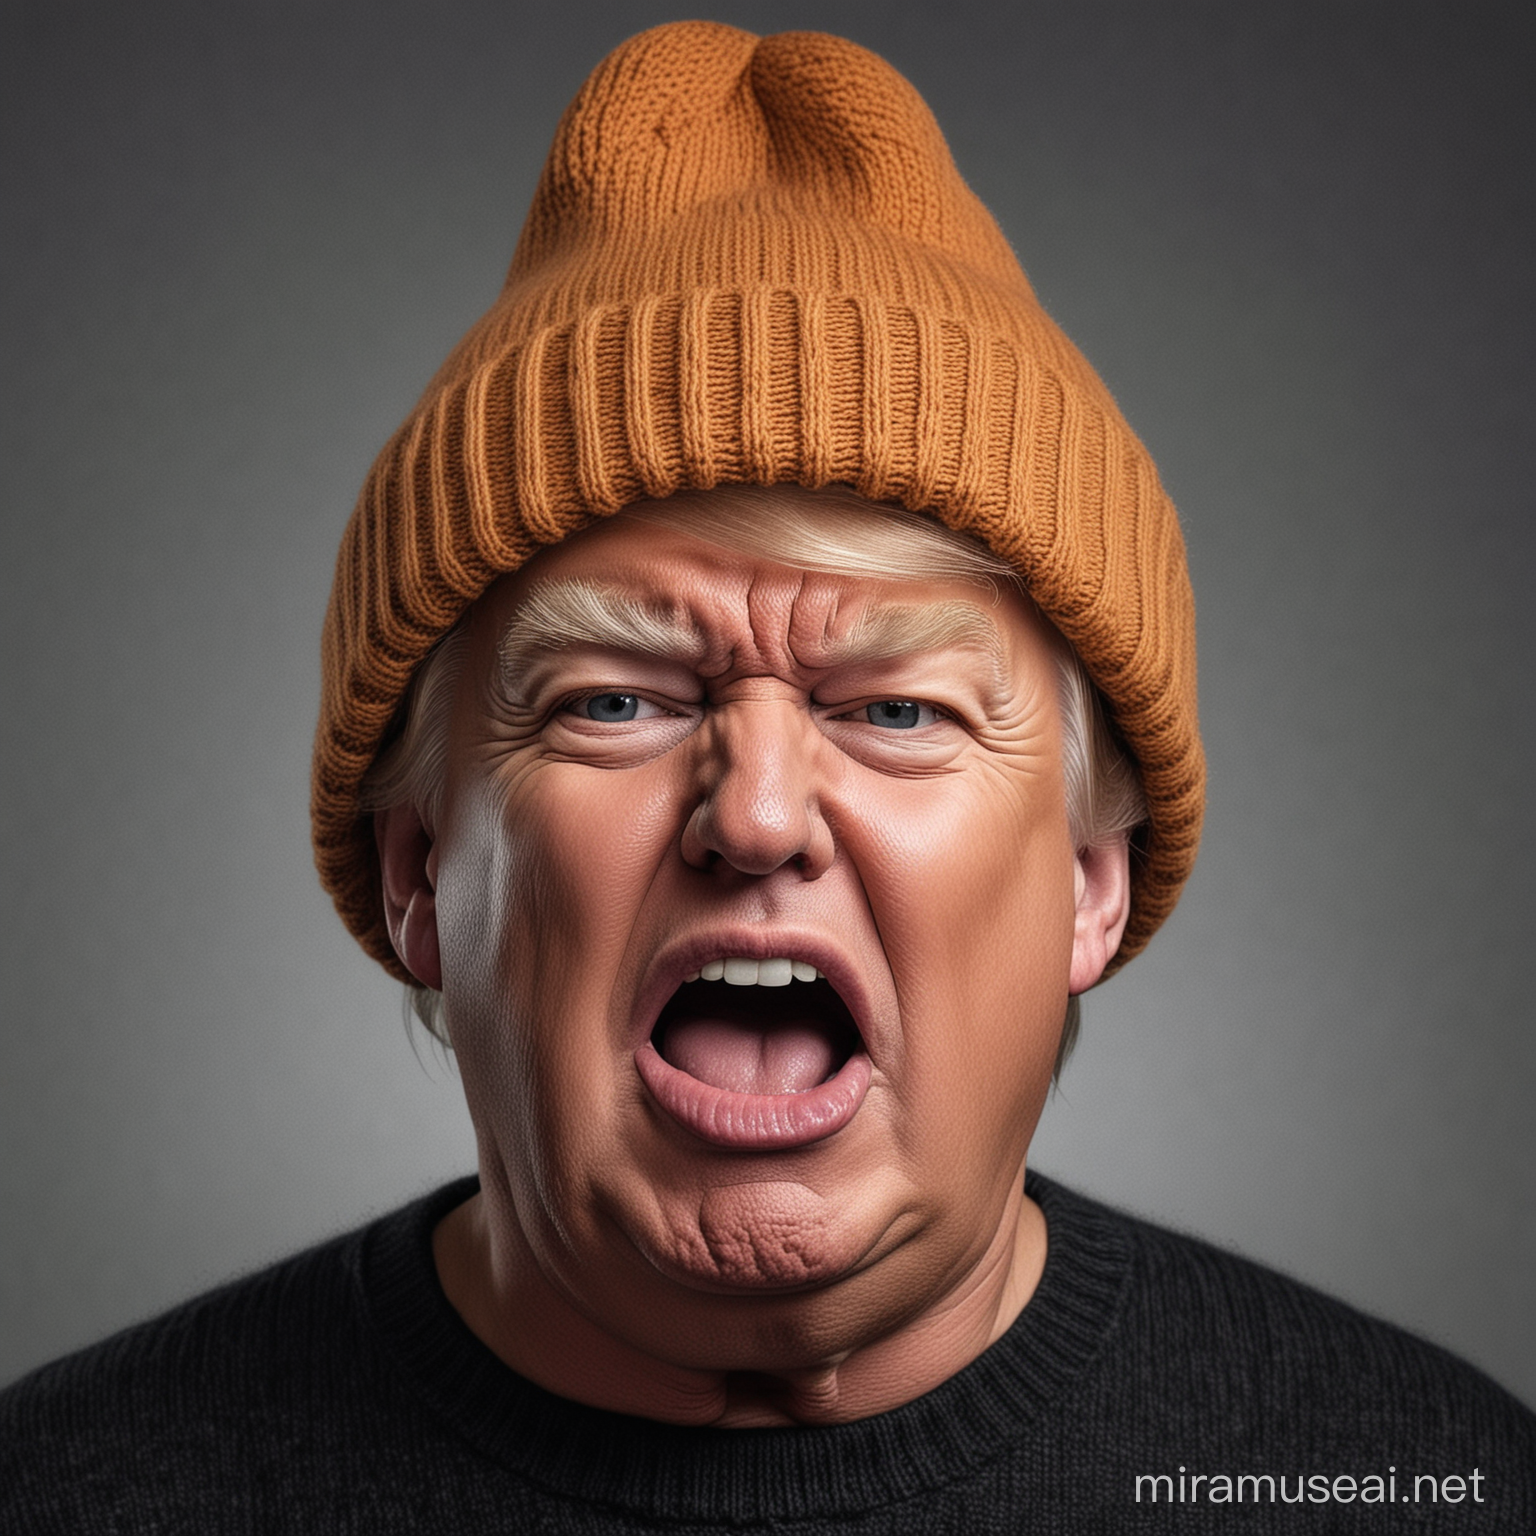 Donald Trump Meme Angry Headshot with Knitted Beanie Hat